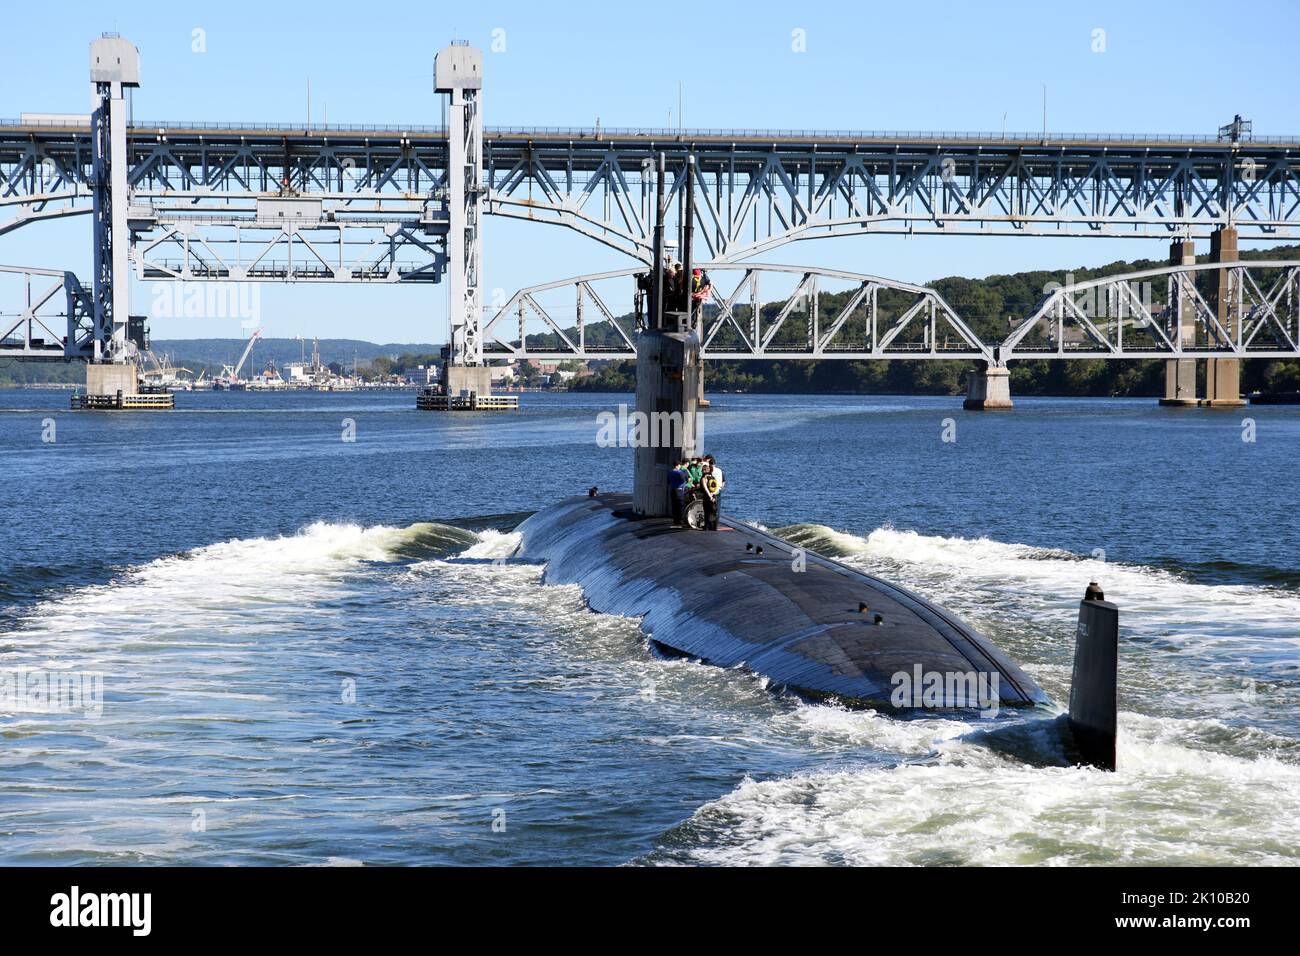 Groton, United States. 02 September, 2022. The U.S. Navy nuclear-power Los Angeles-class fast attack submarine USS San Juan transits the Thames River as it arrives to homeport at Naval Submarine Base New London, September 2, 2022 in Groton, Connecticut. Credit: MCS Joshua Karsten/U.S. Marines/Alamy Live News Stock Photo